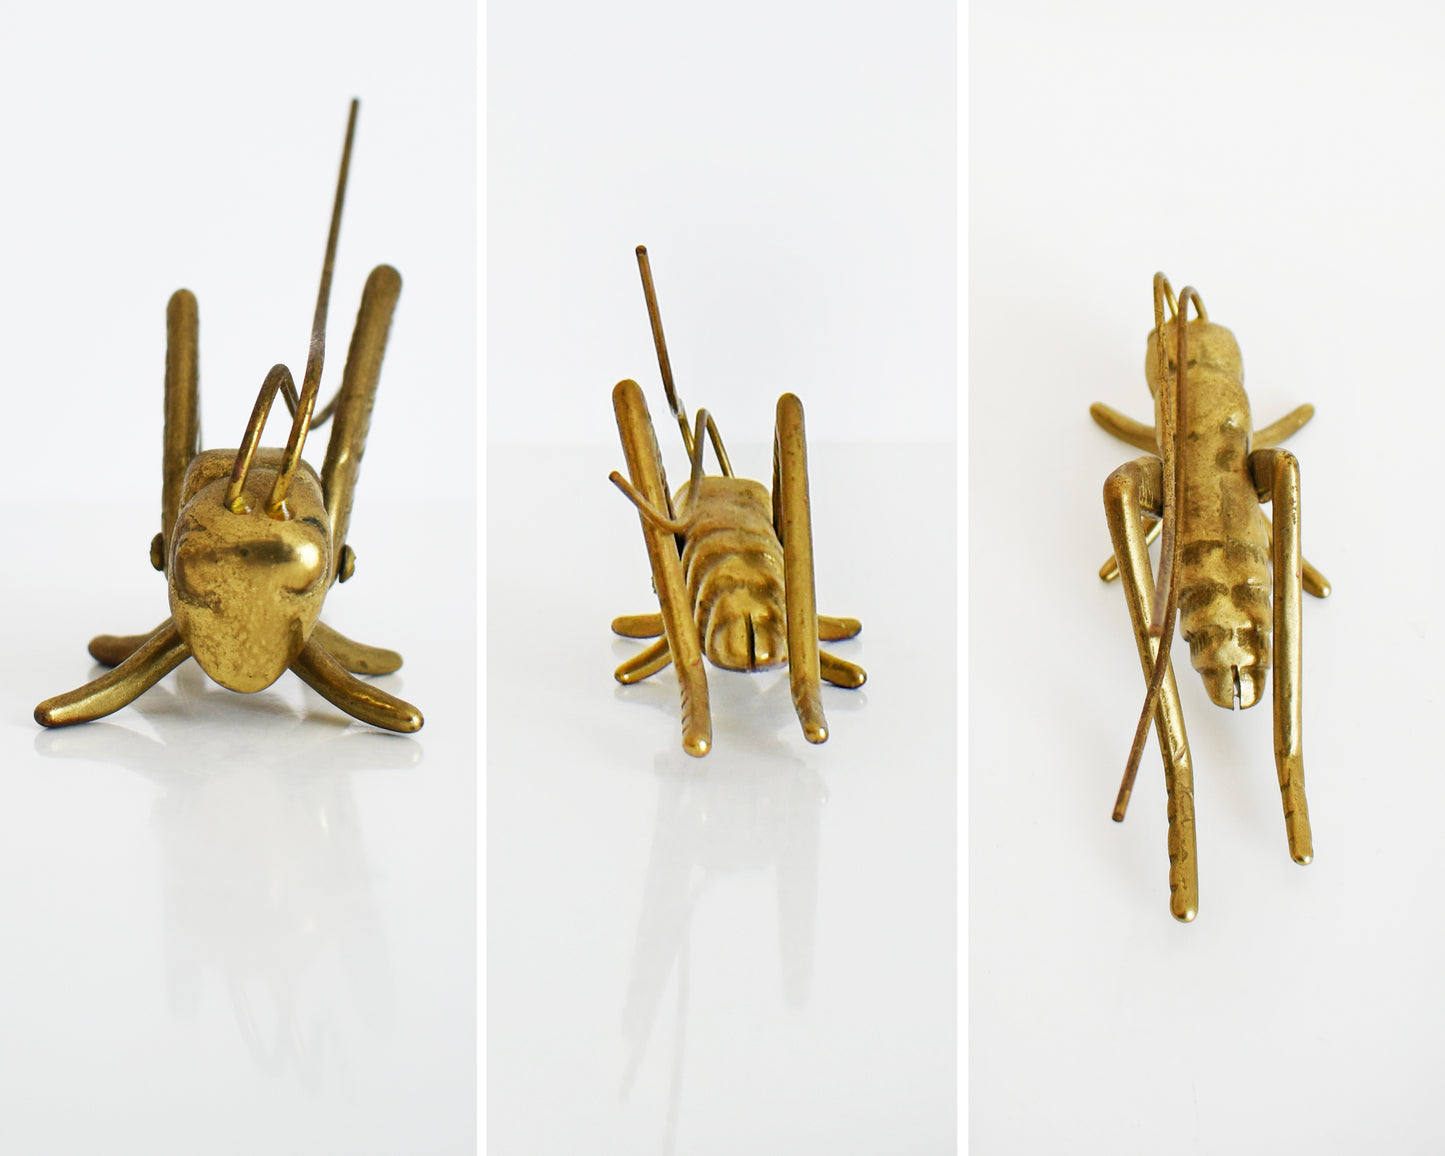 Side by side front and back of a vintage brass grasshopper/cricket on a white table.